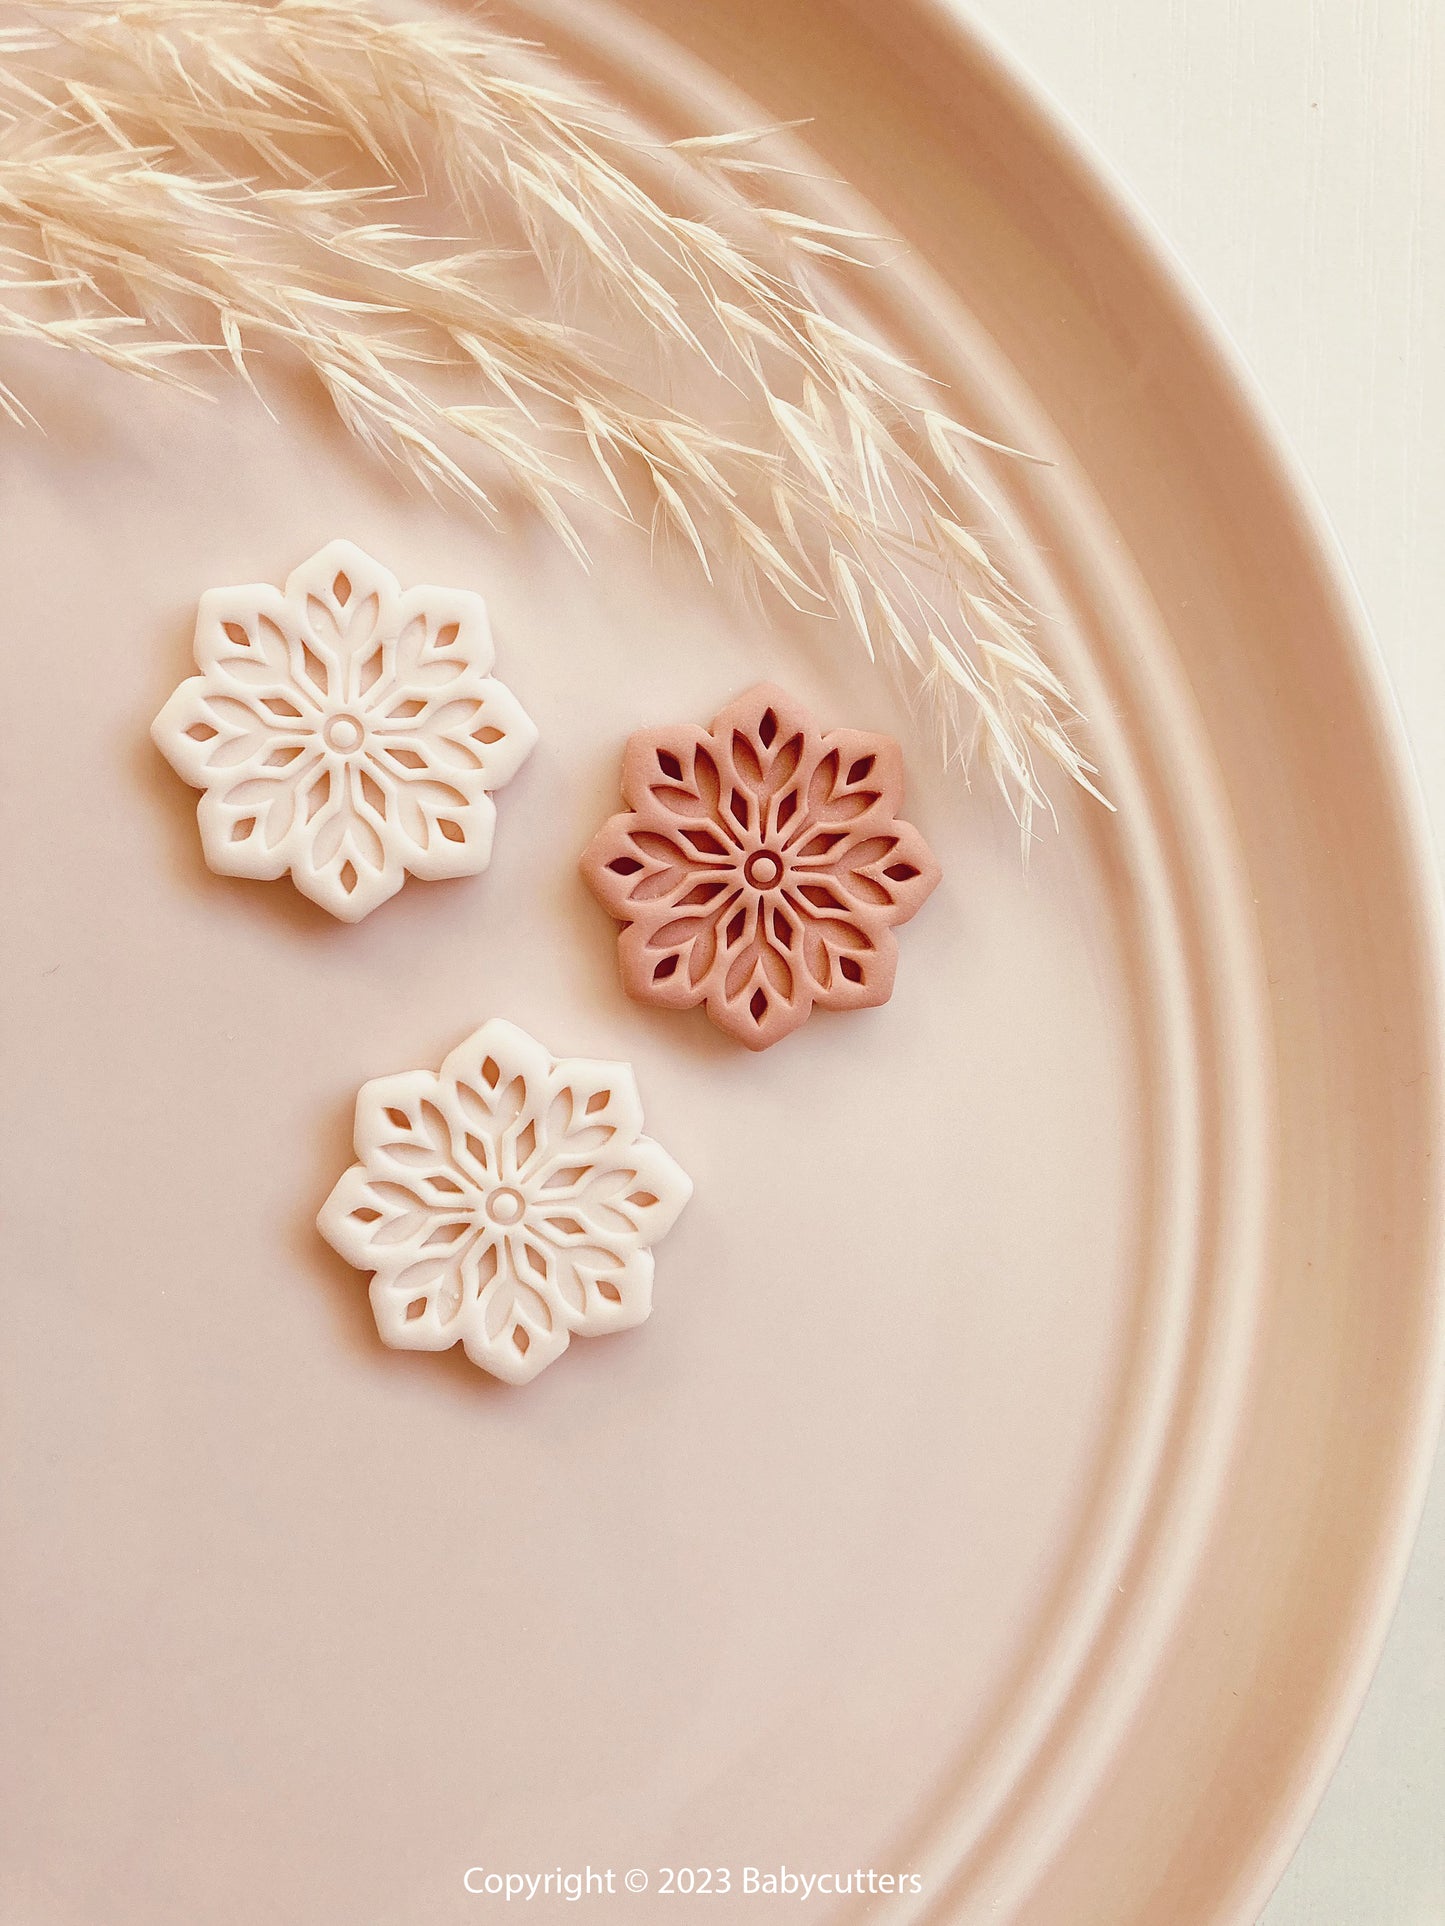 Snowflake Cutter v5 - Polymer Clay Cutter Tools